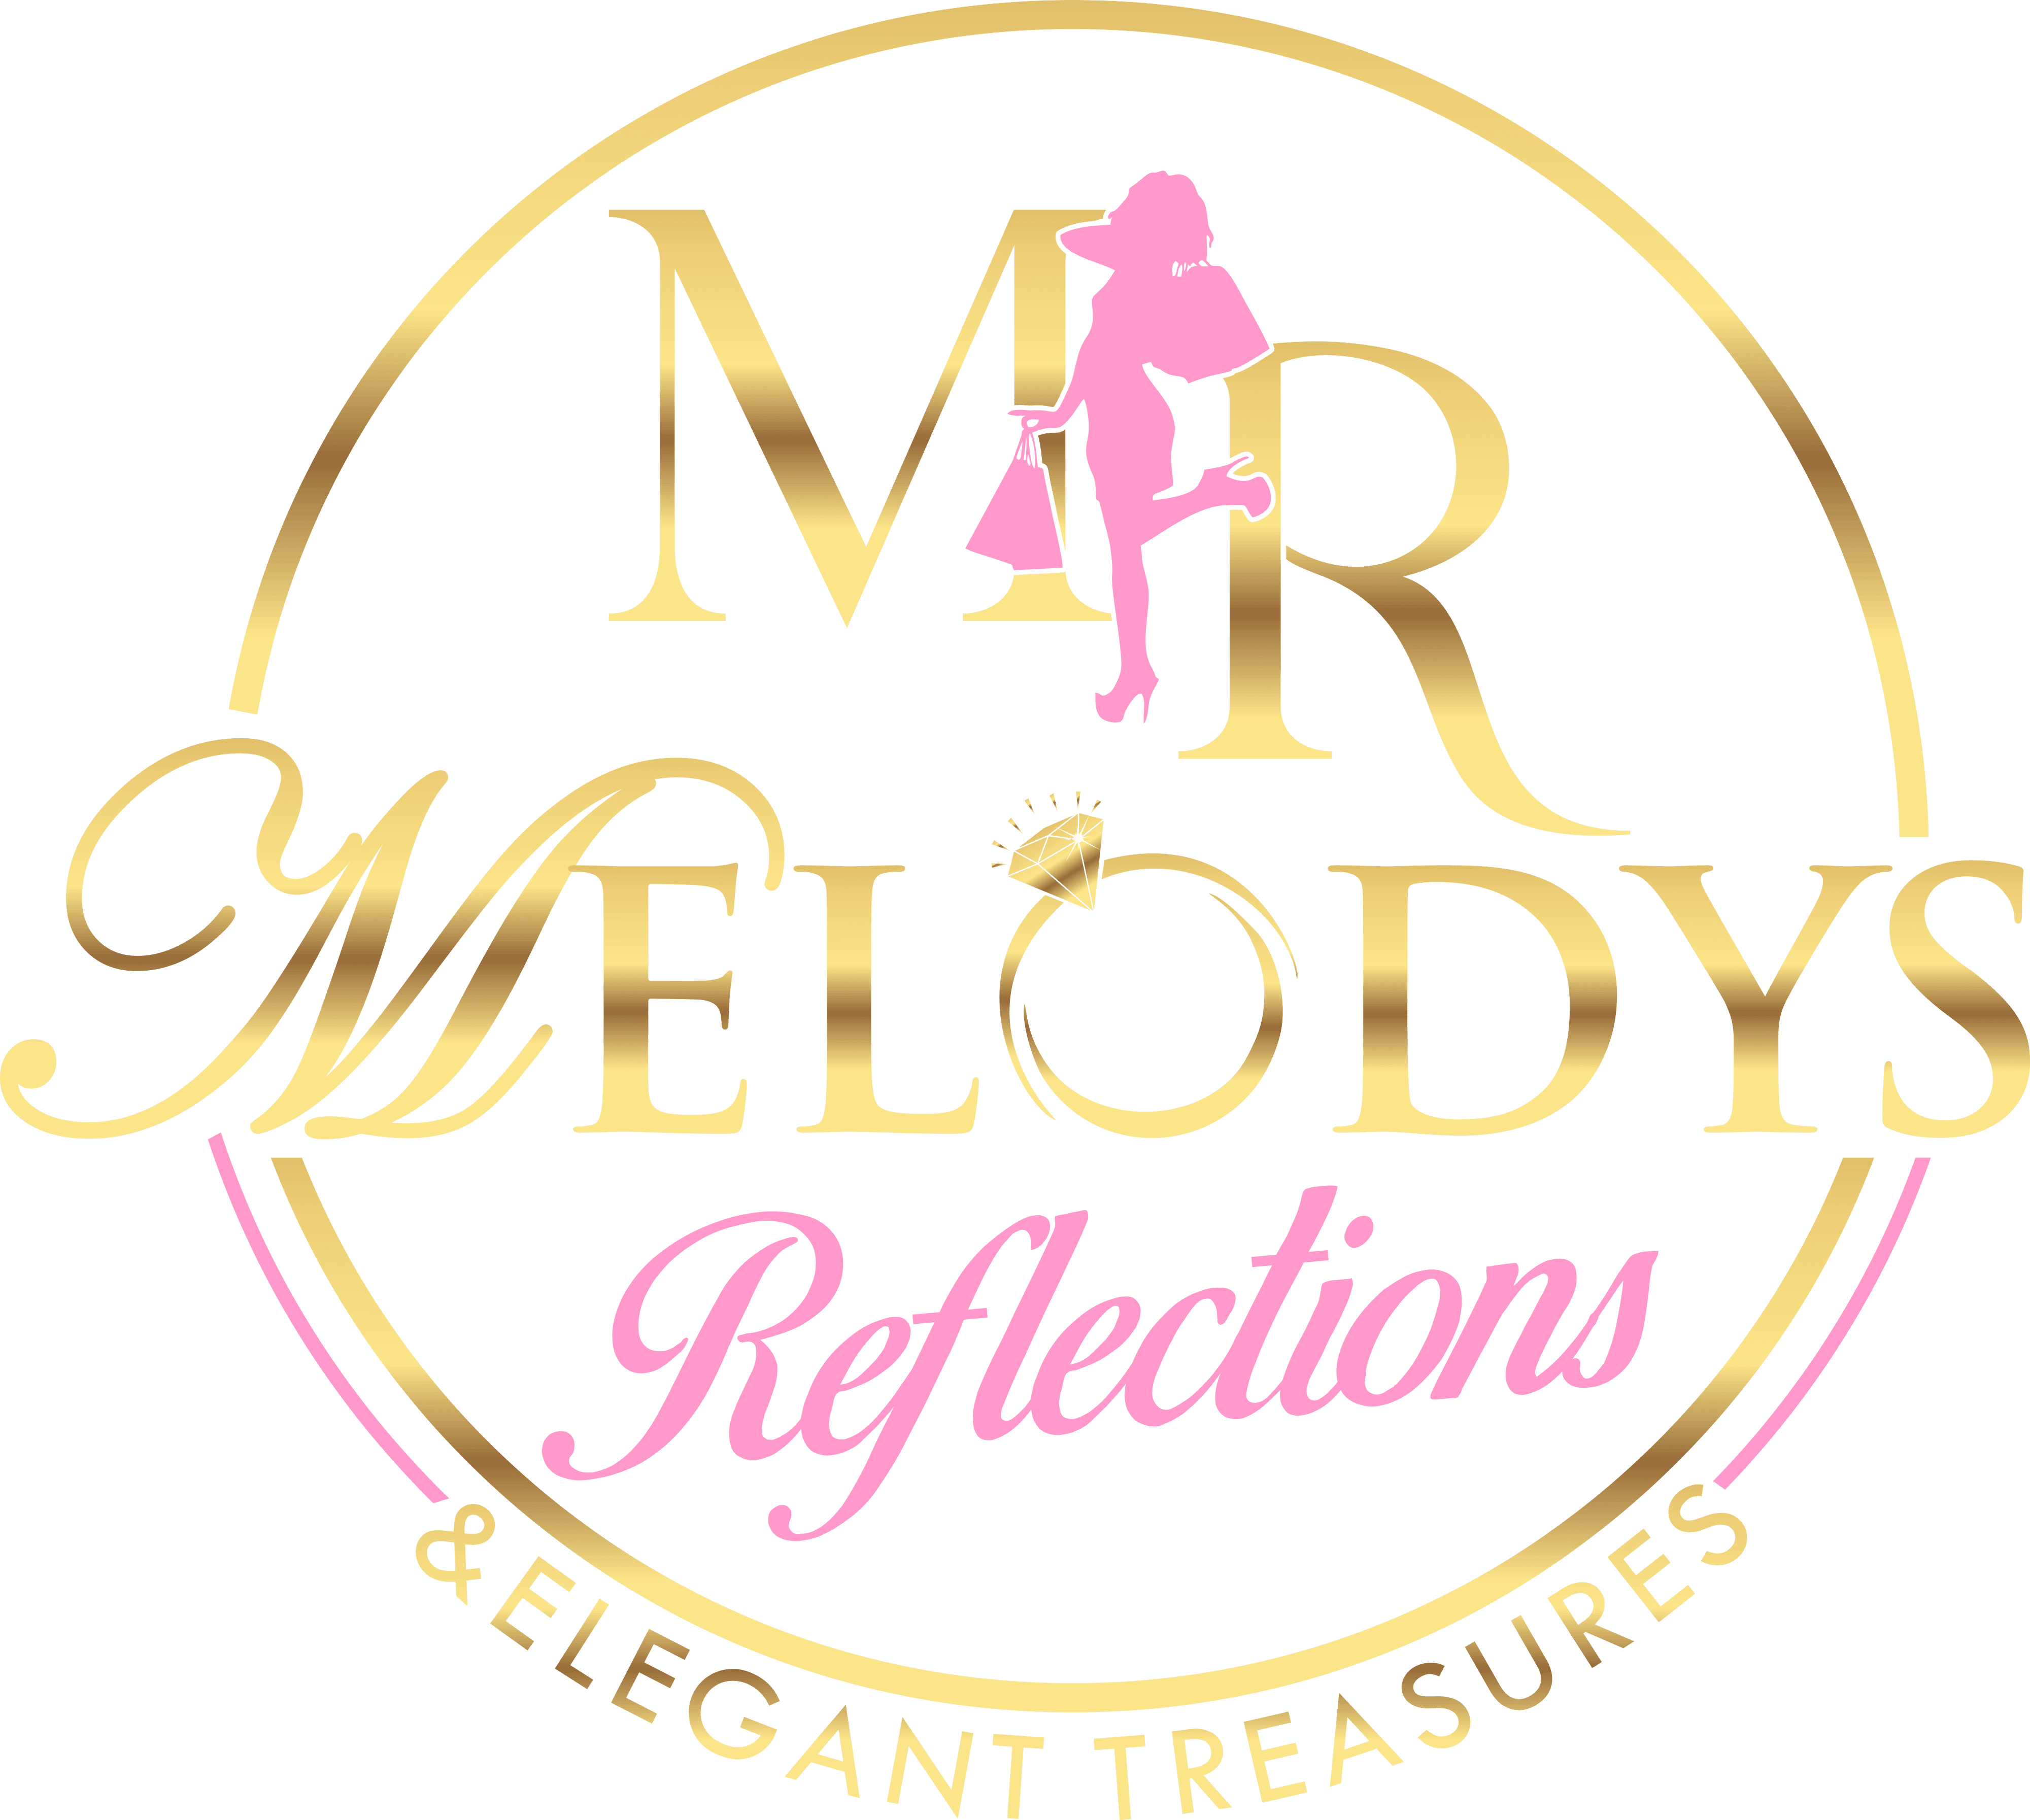 Melodys Reflections